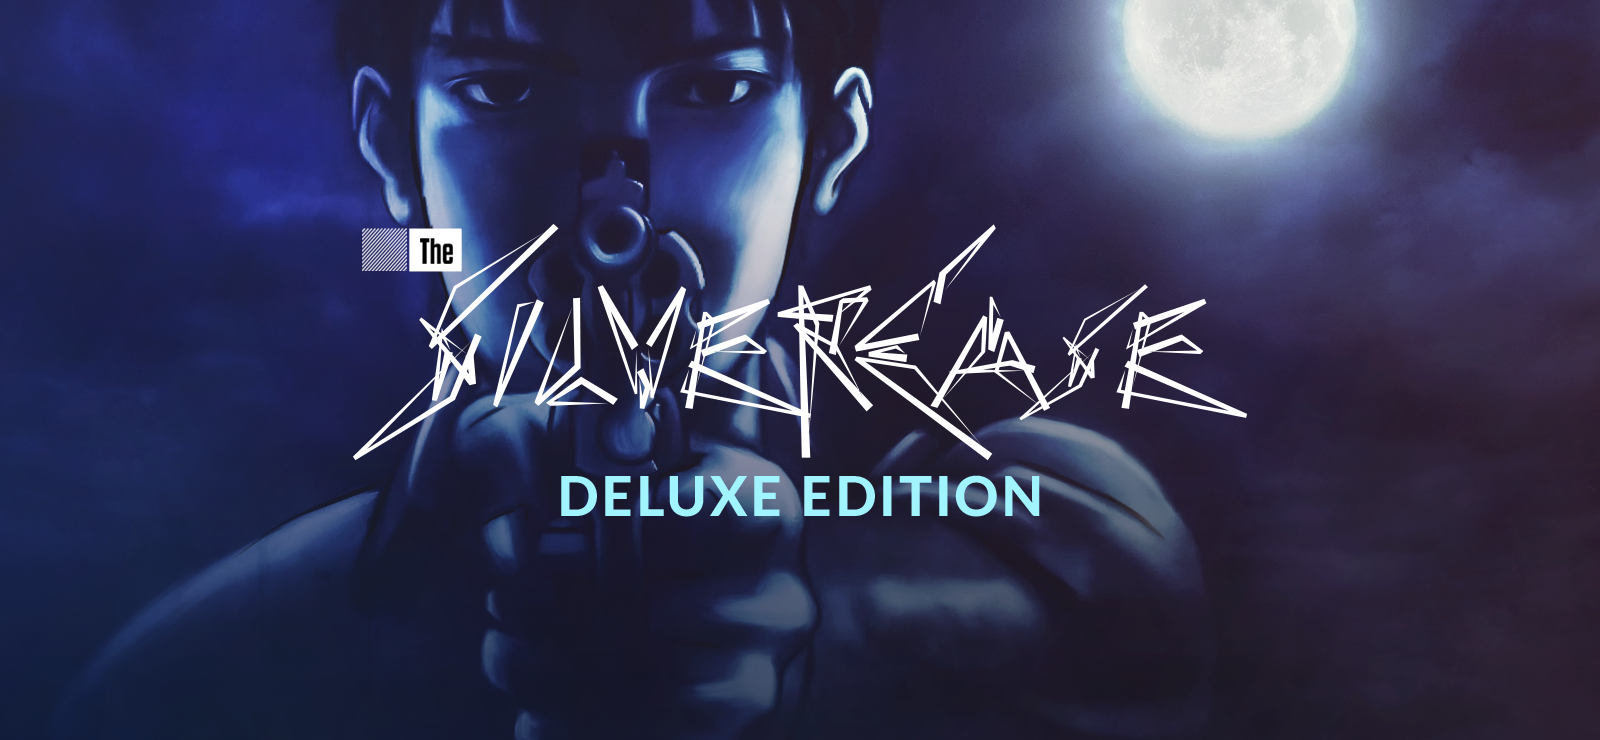 The Silver Case Deluxe Edition